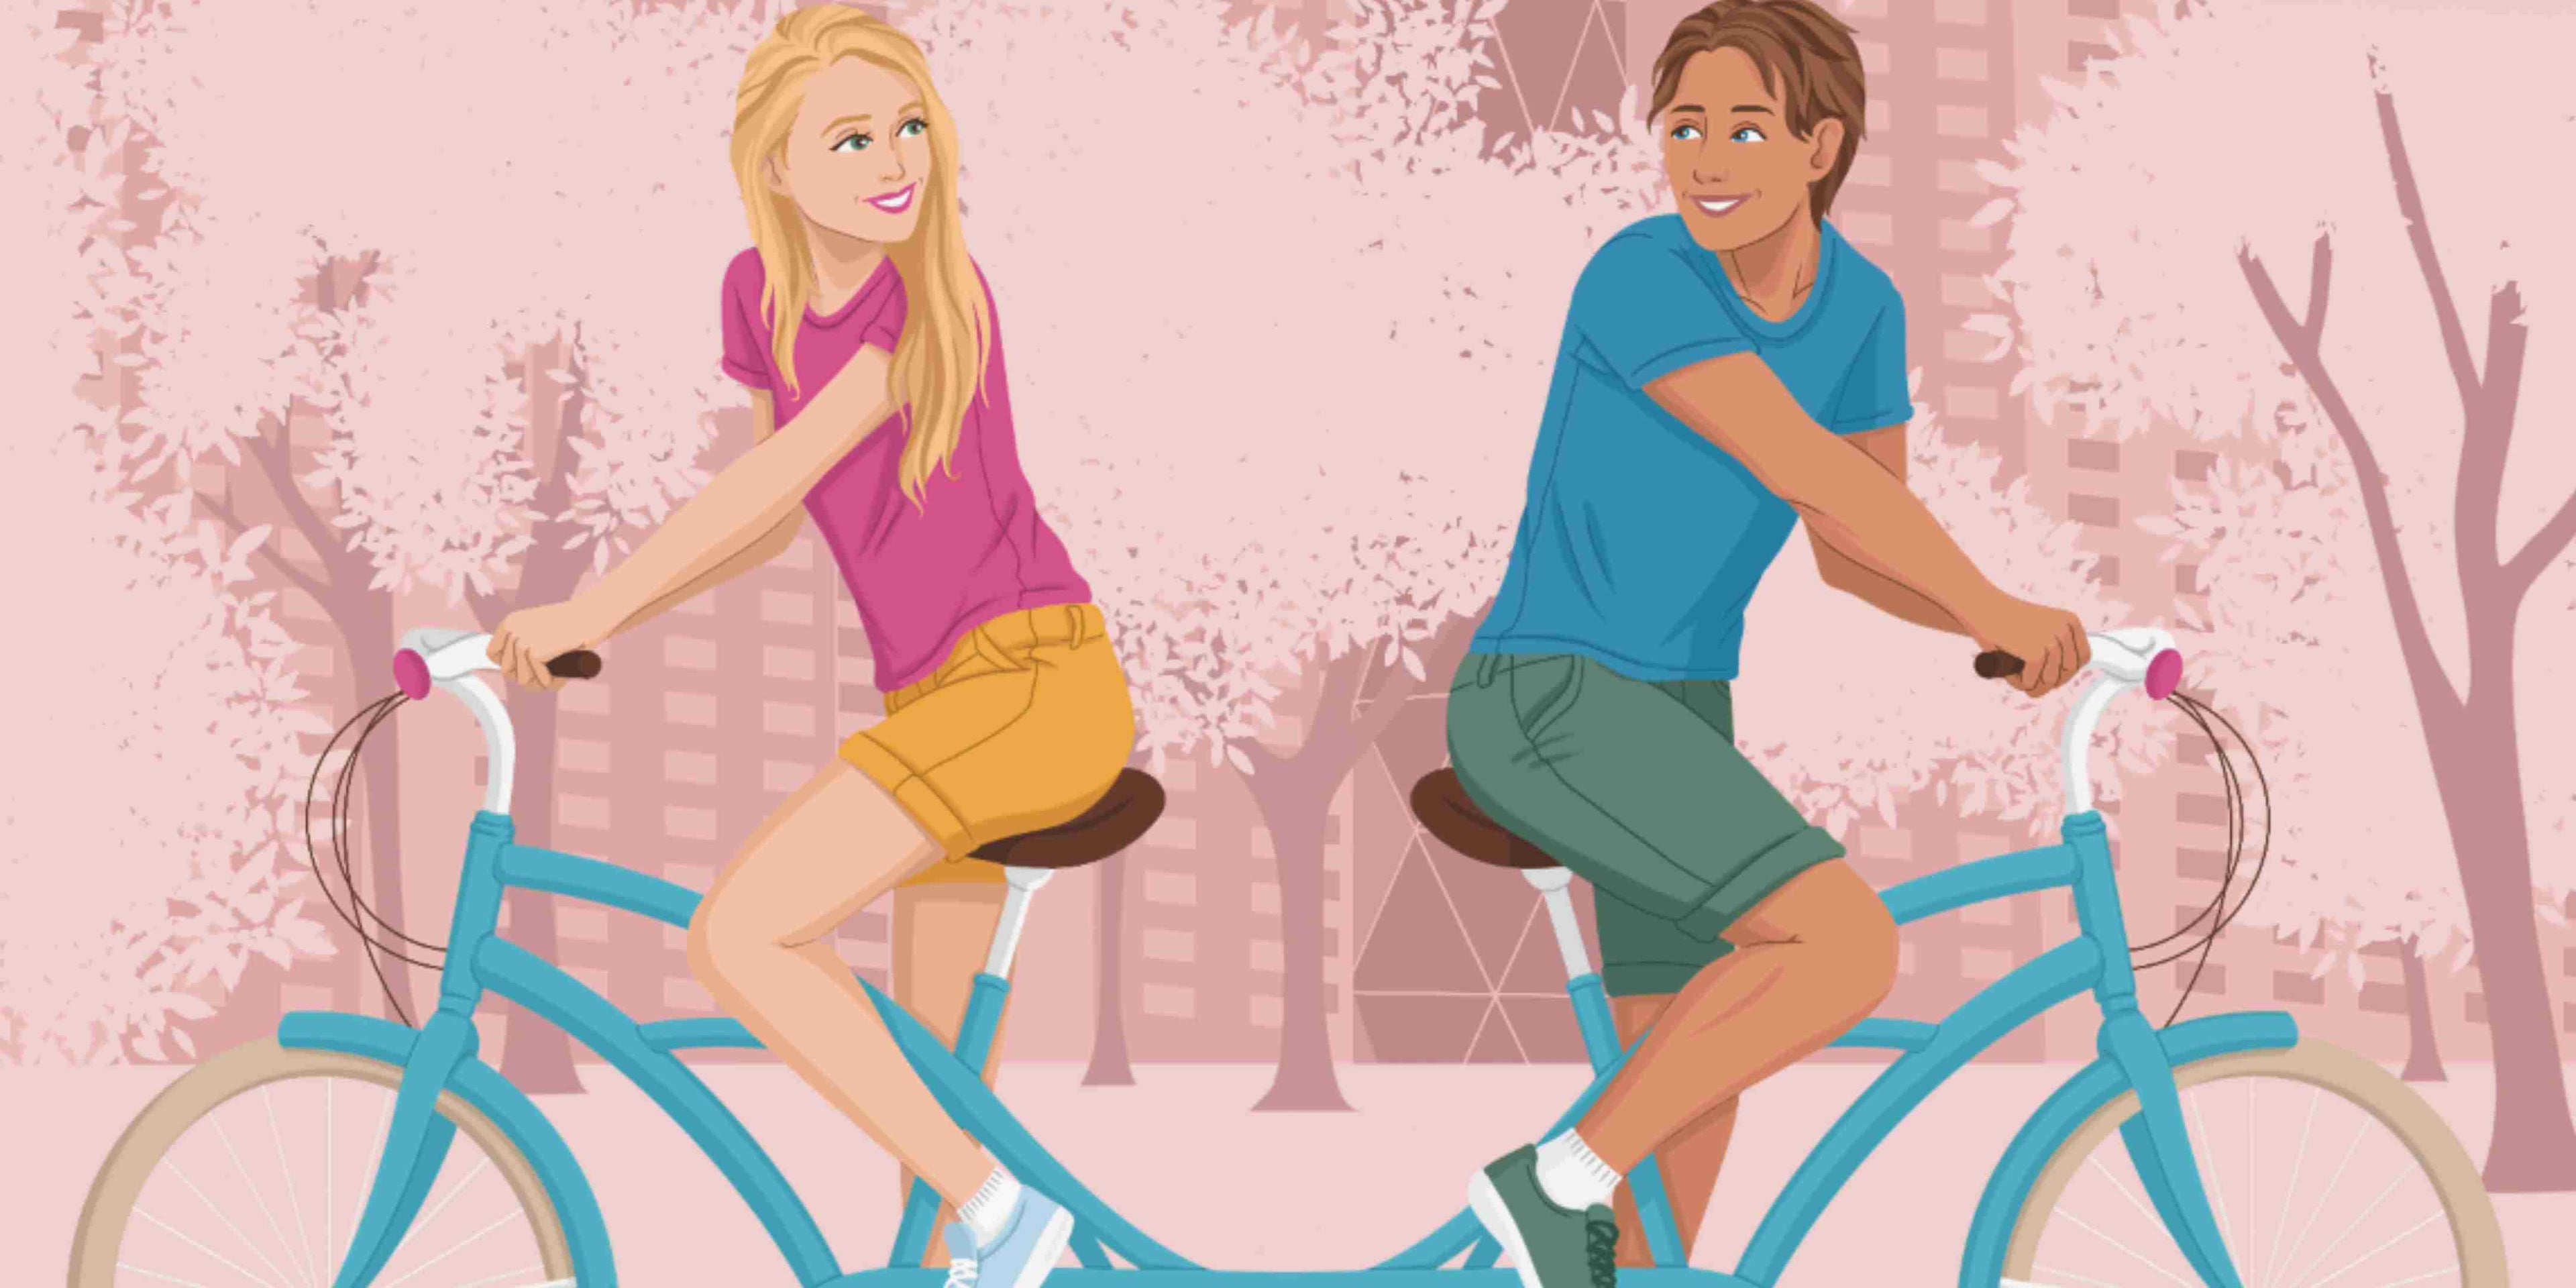 A woman  and a man on a two-person bicycle, but the handlebars are facing in opposite directions but they are looking at each other flirtatiously